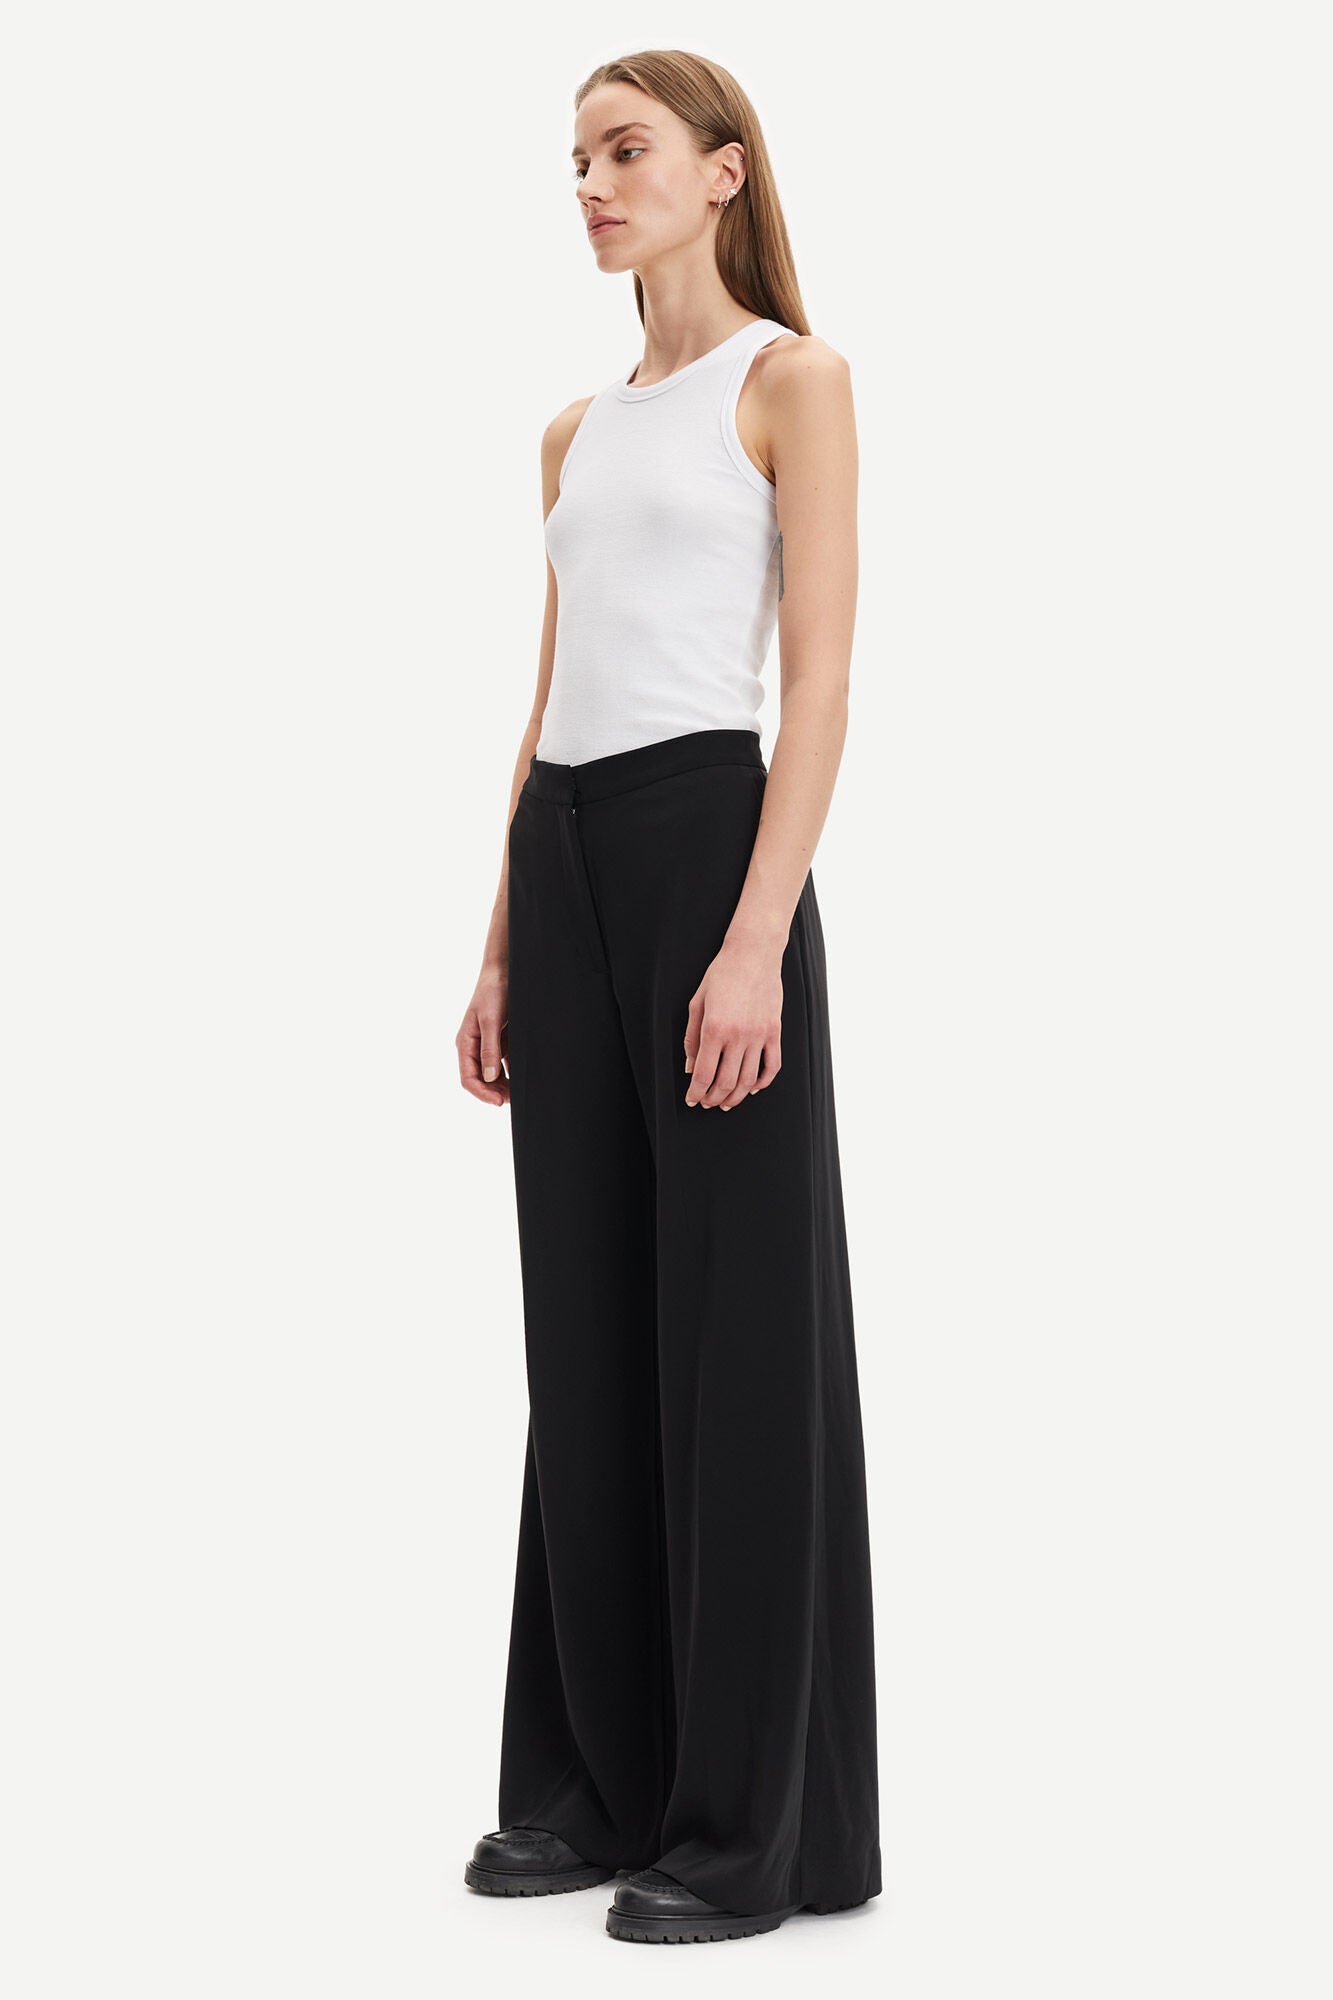 Collot wide leg trousers in black